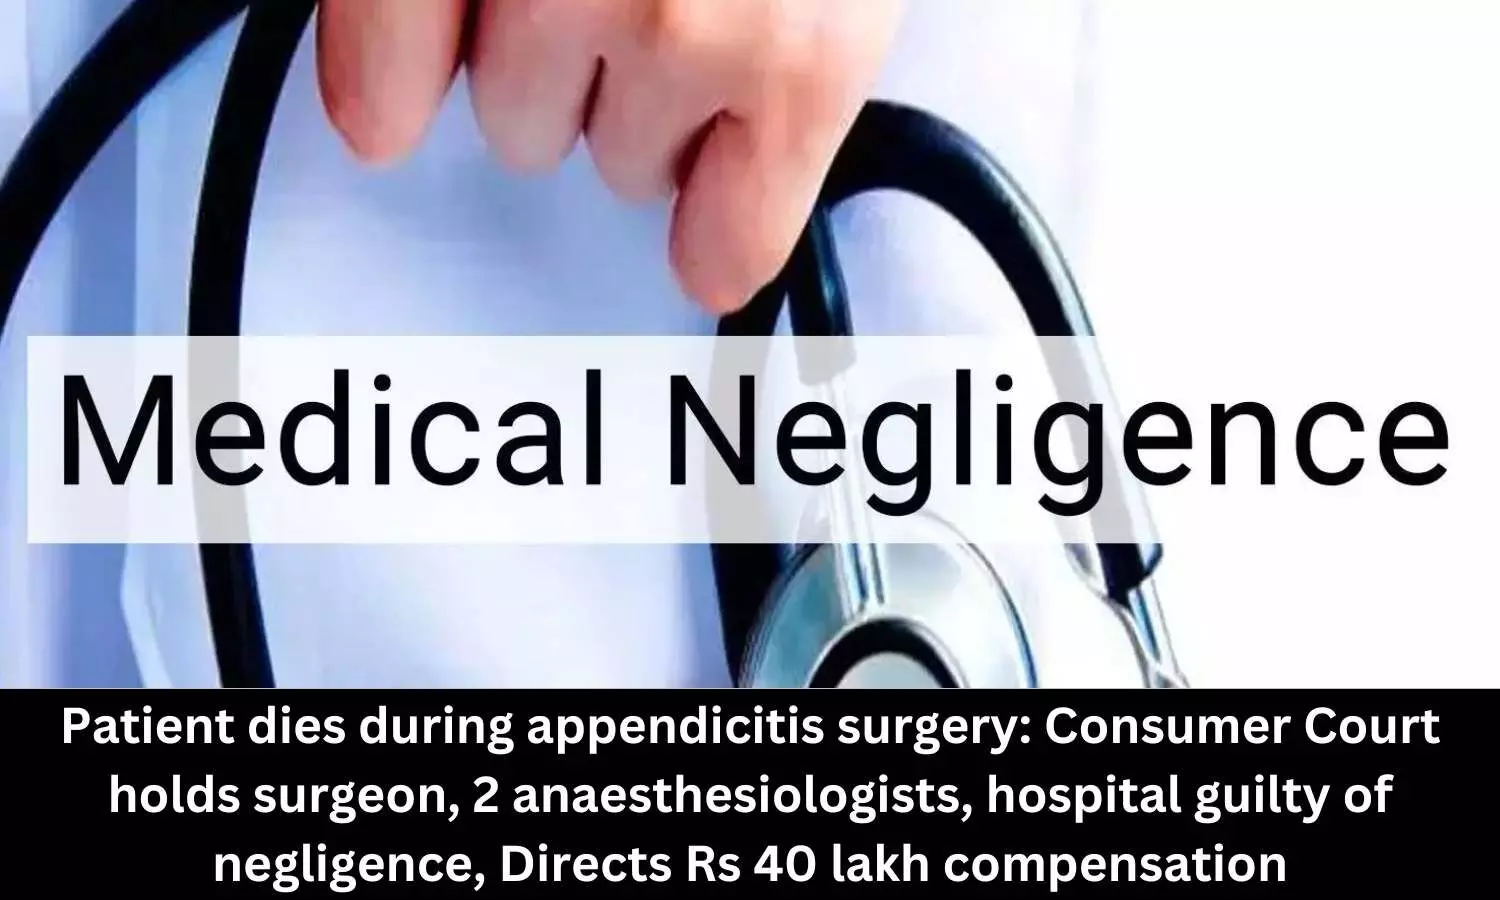 Patient dies during appendicitis surgery: Consumer Court holds surgeon, 2 anaesthesiologists, hospital guilty of negligence